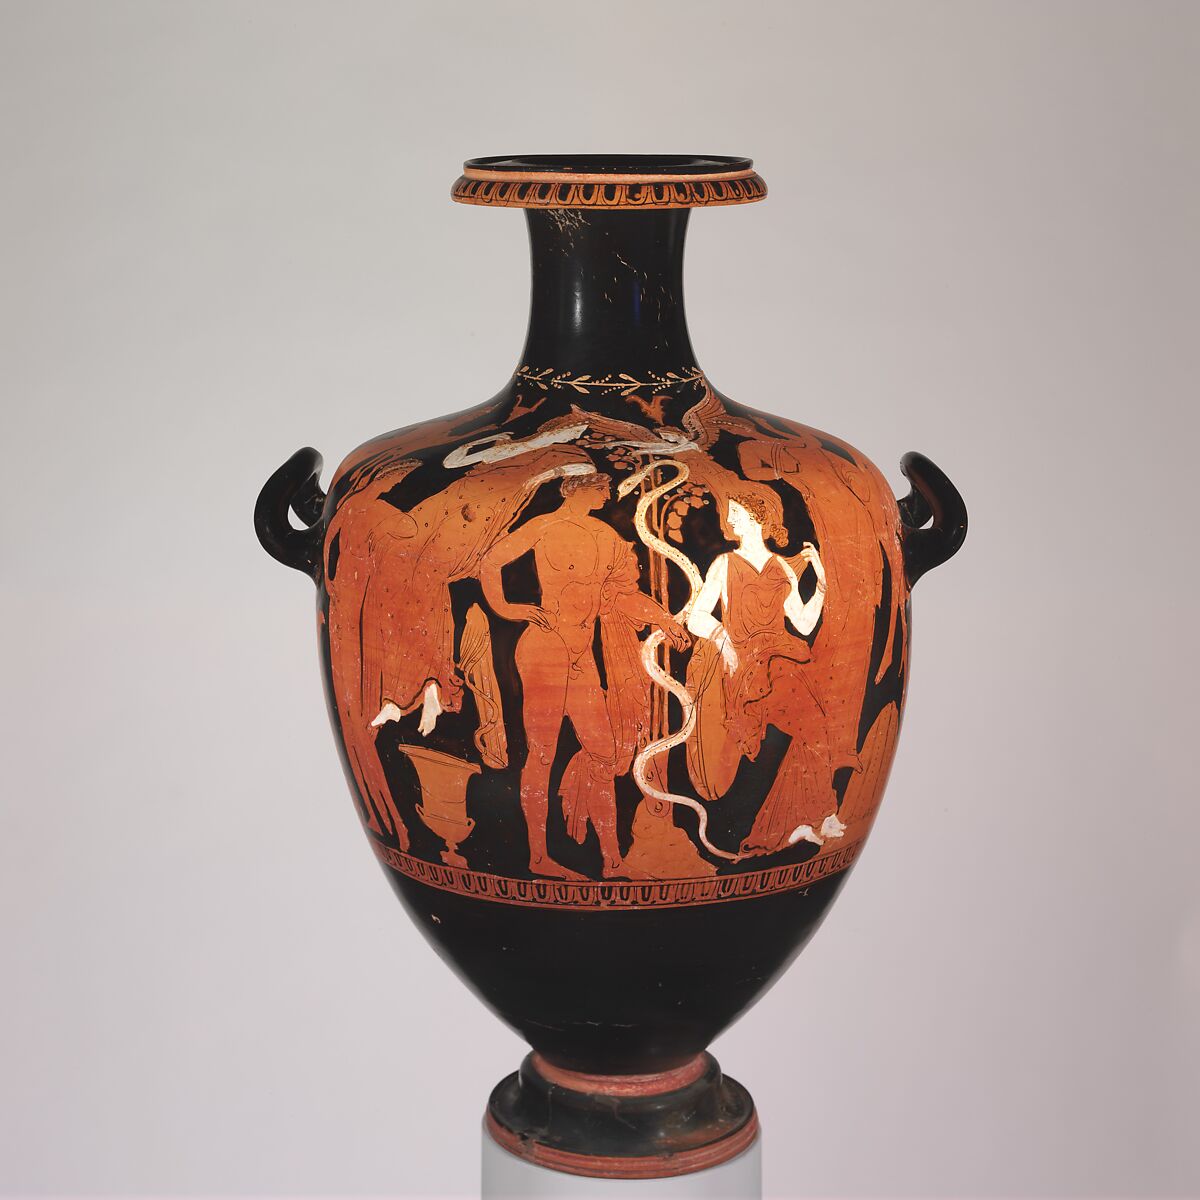 Terracotta hydria (water jar), Attributed to the Hesperides Painter, Terracotta, Greek, Attic 